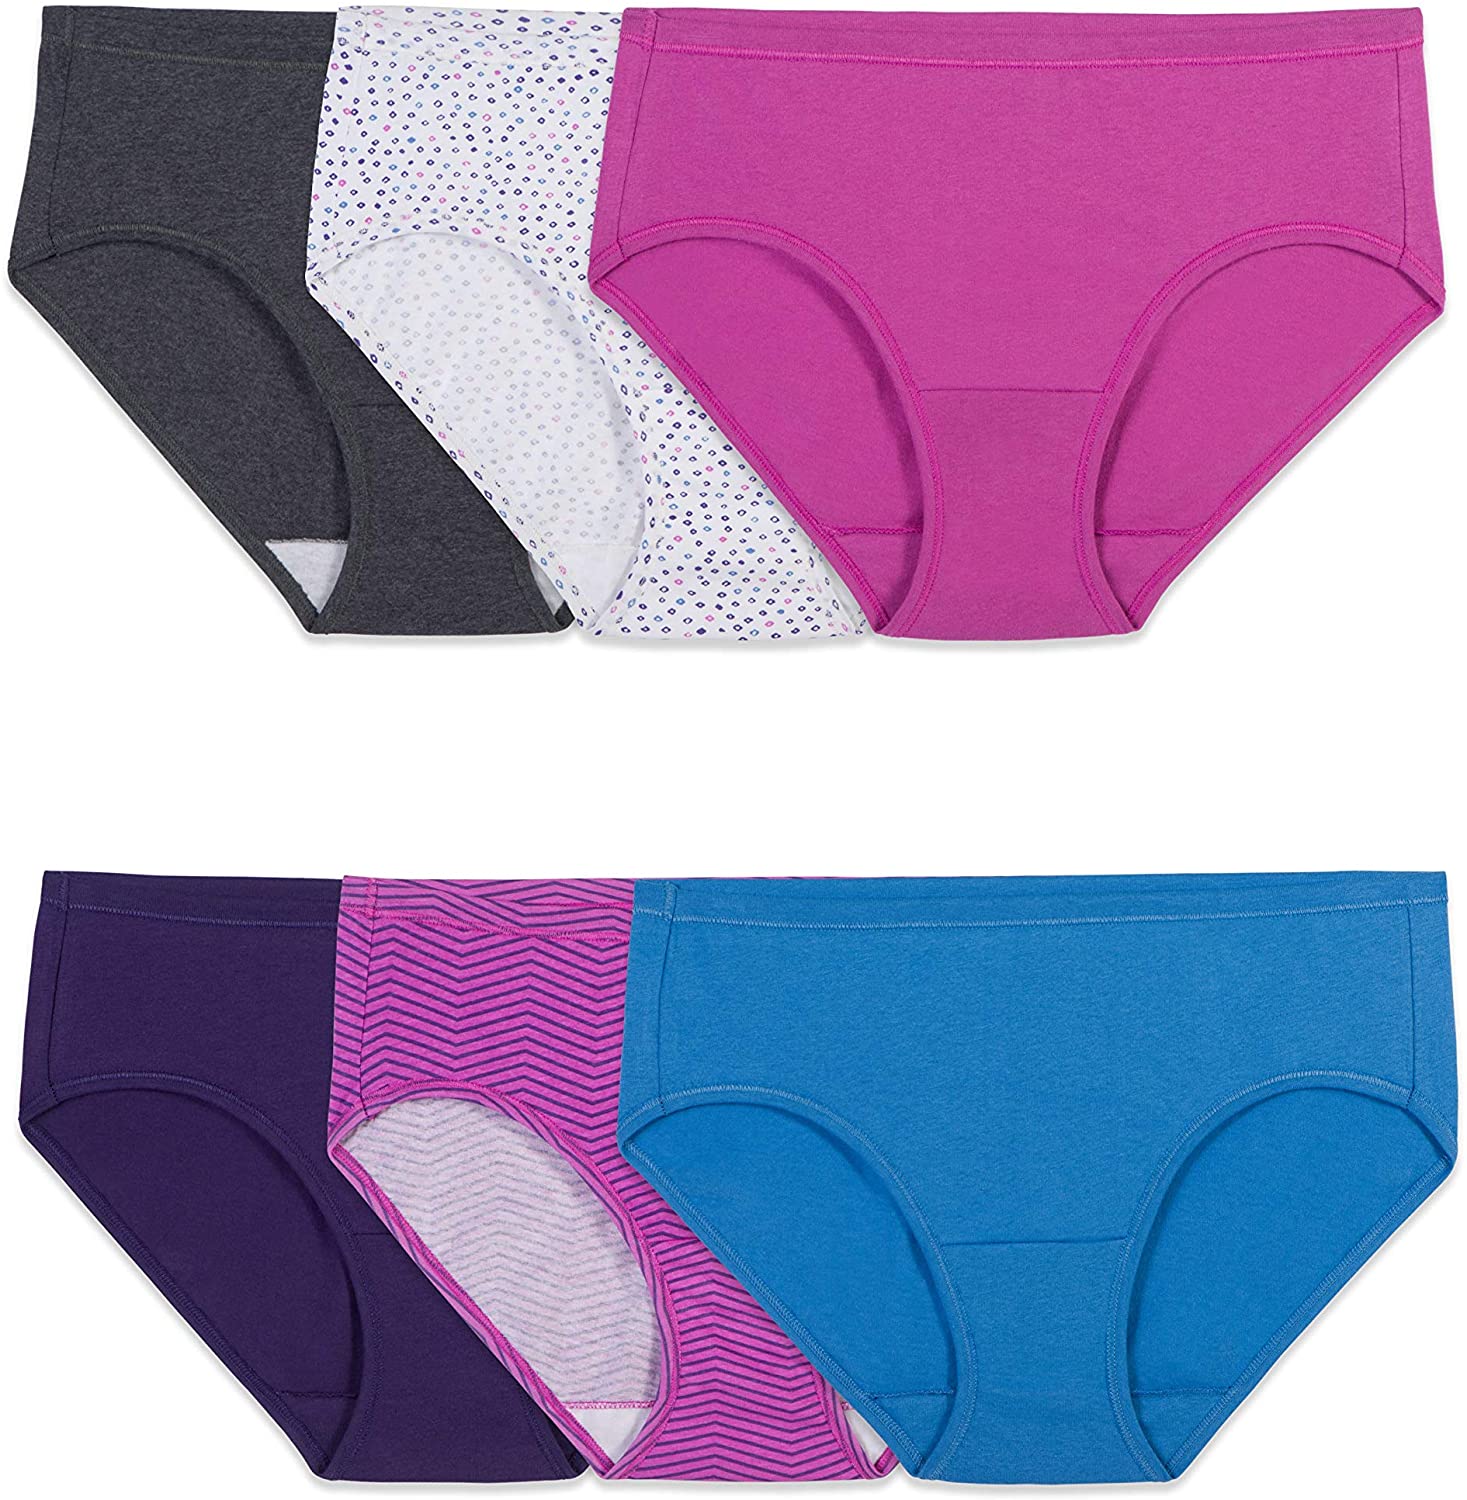 6DHICC2 - Fruit Of The Loom Womens Cotton Hipster Panties 6-Pack, 5,  Assorted